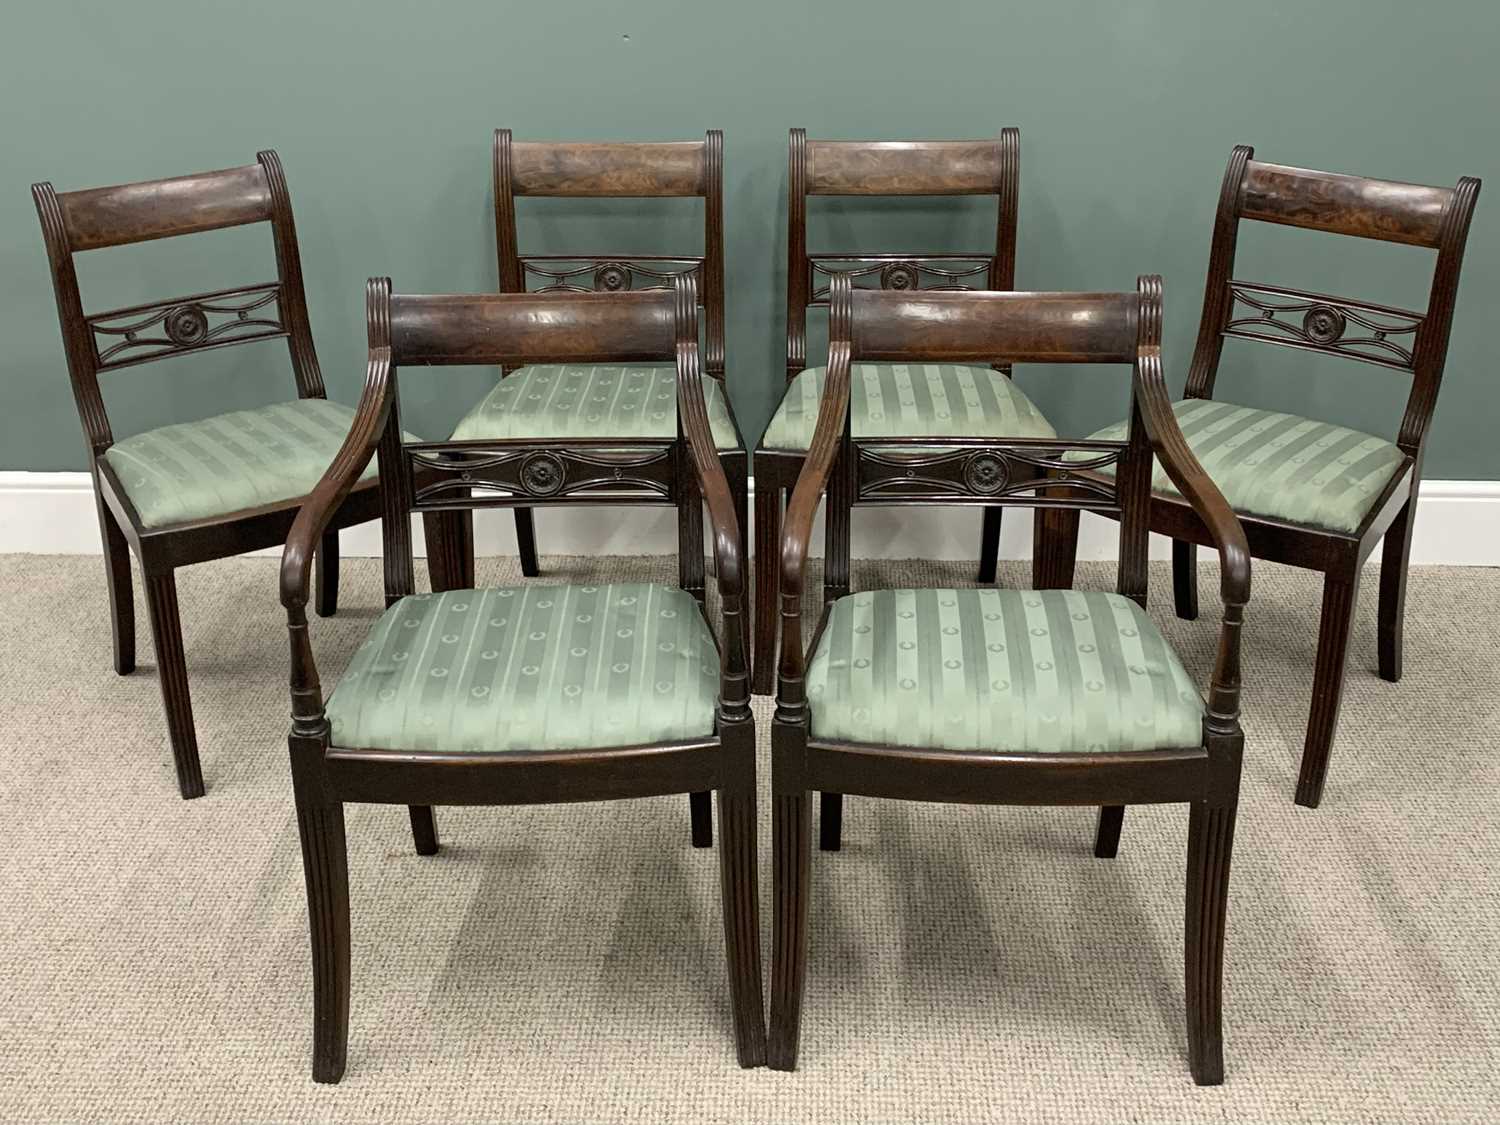 SET OF SIX REGENCY MAHOGANY DINING CHAIRS (4 + 2), slightly curved backs, carved roundel and pierced